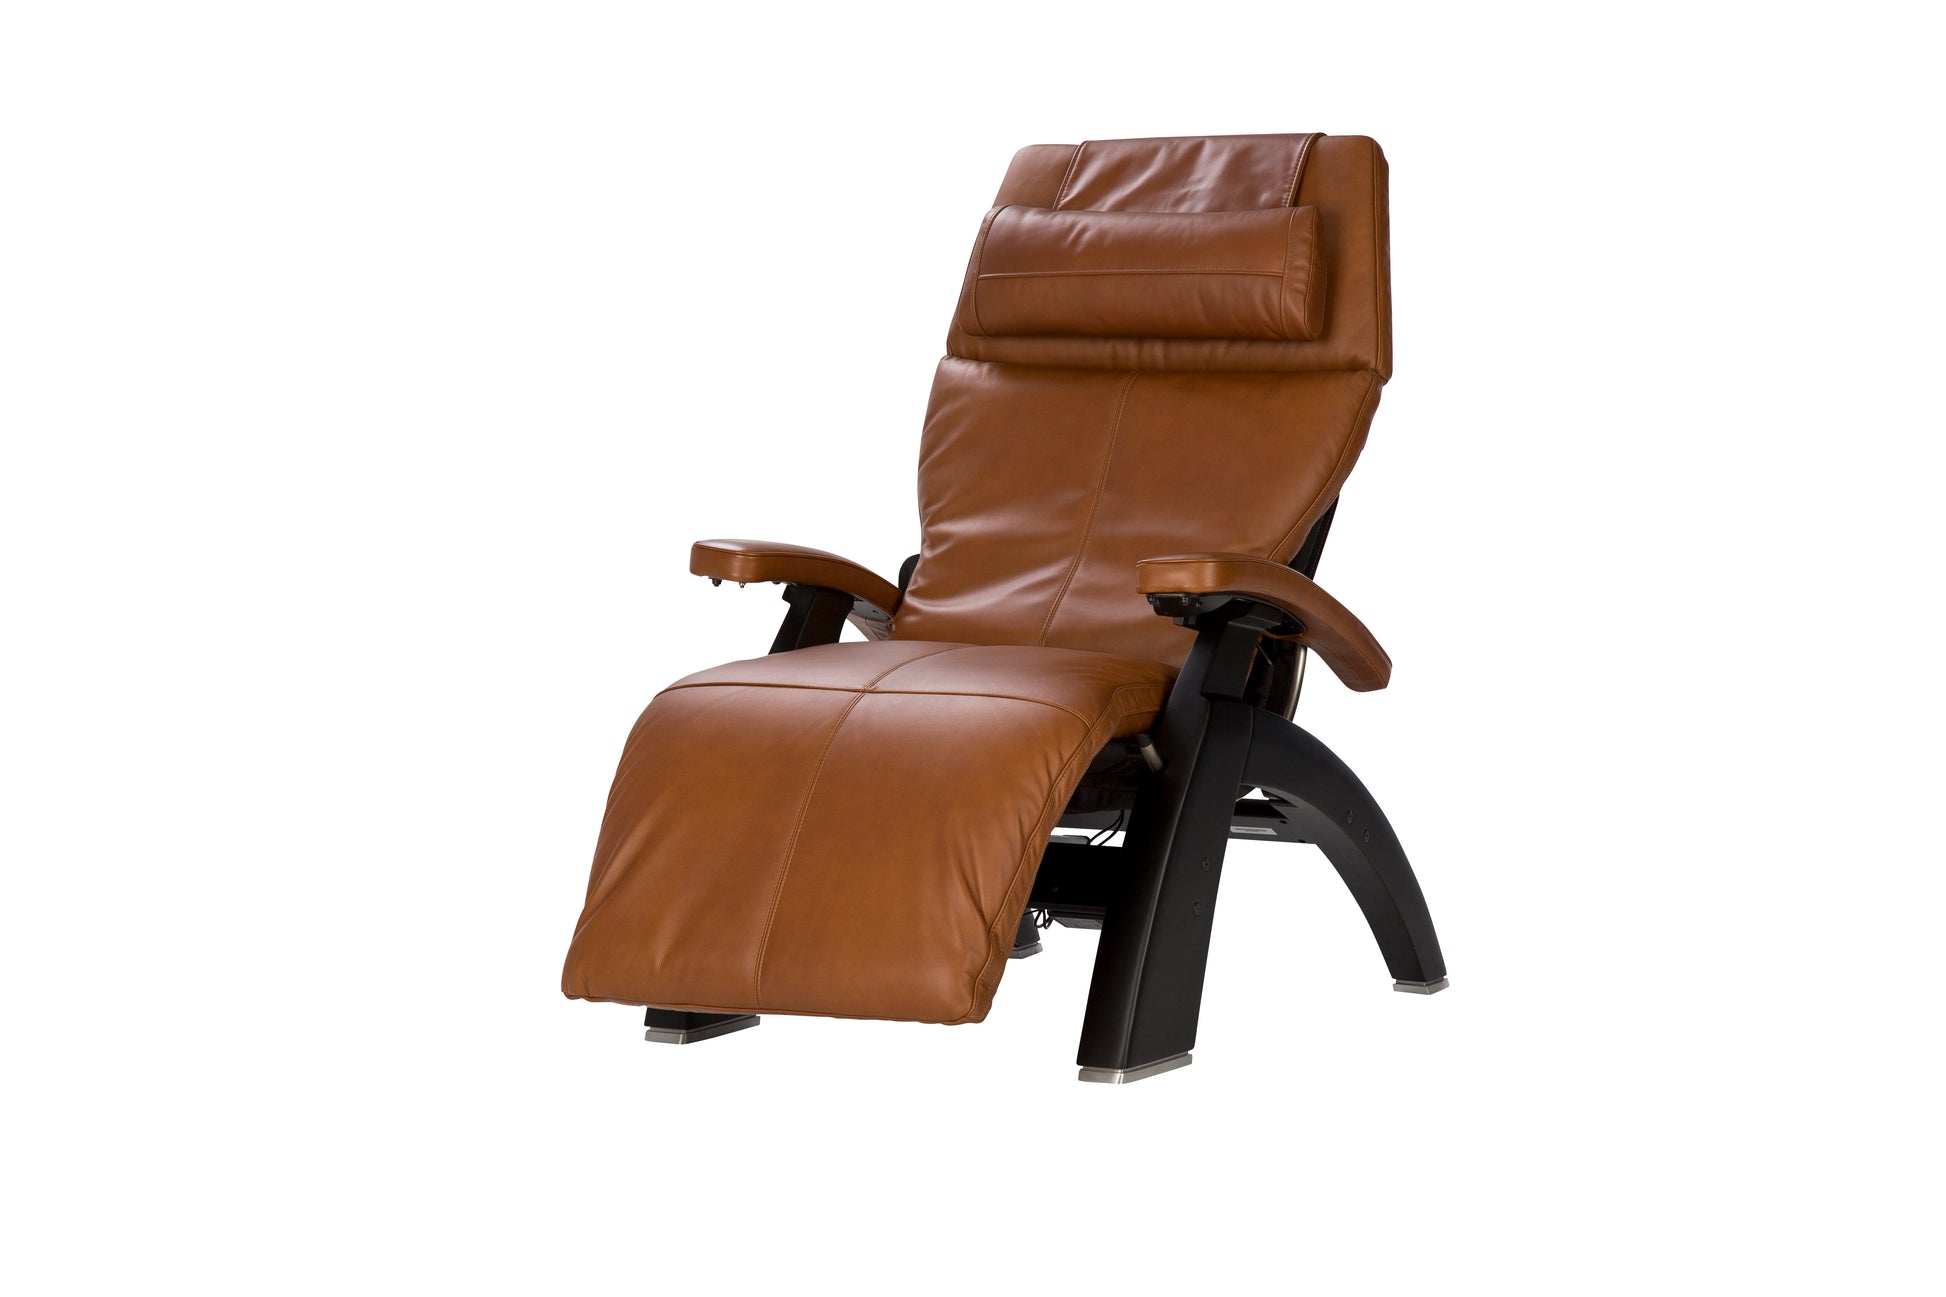 Human Touch Perfect Chair PC-600 Omni-Motion Classic ZG Chair - Supreme / Performance (4649575022652)